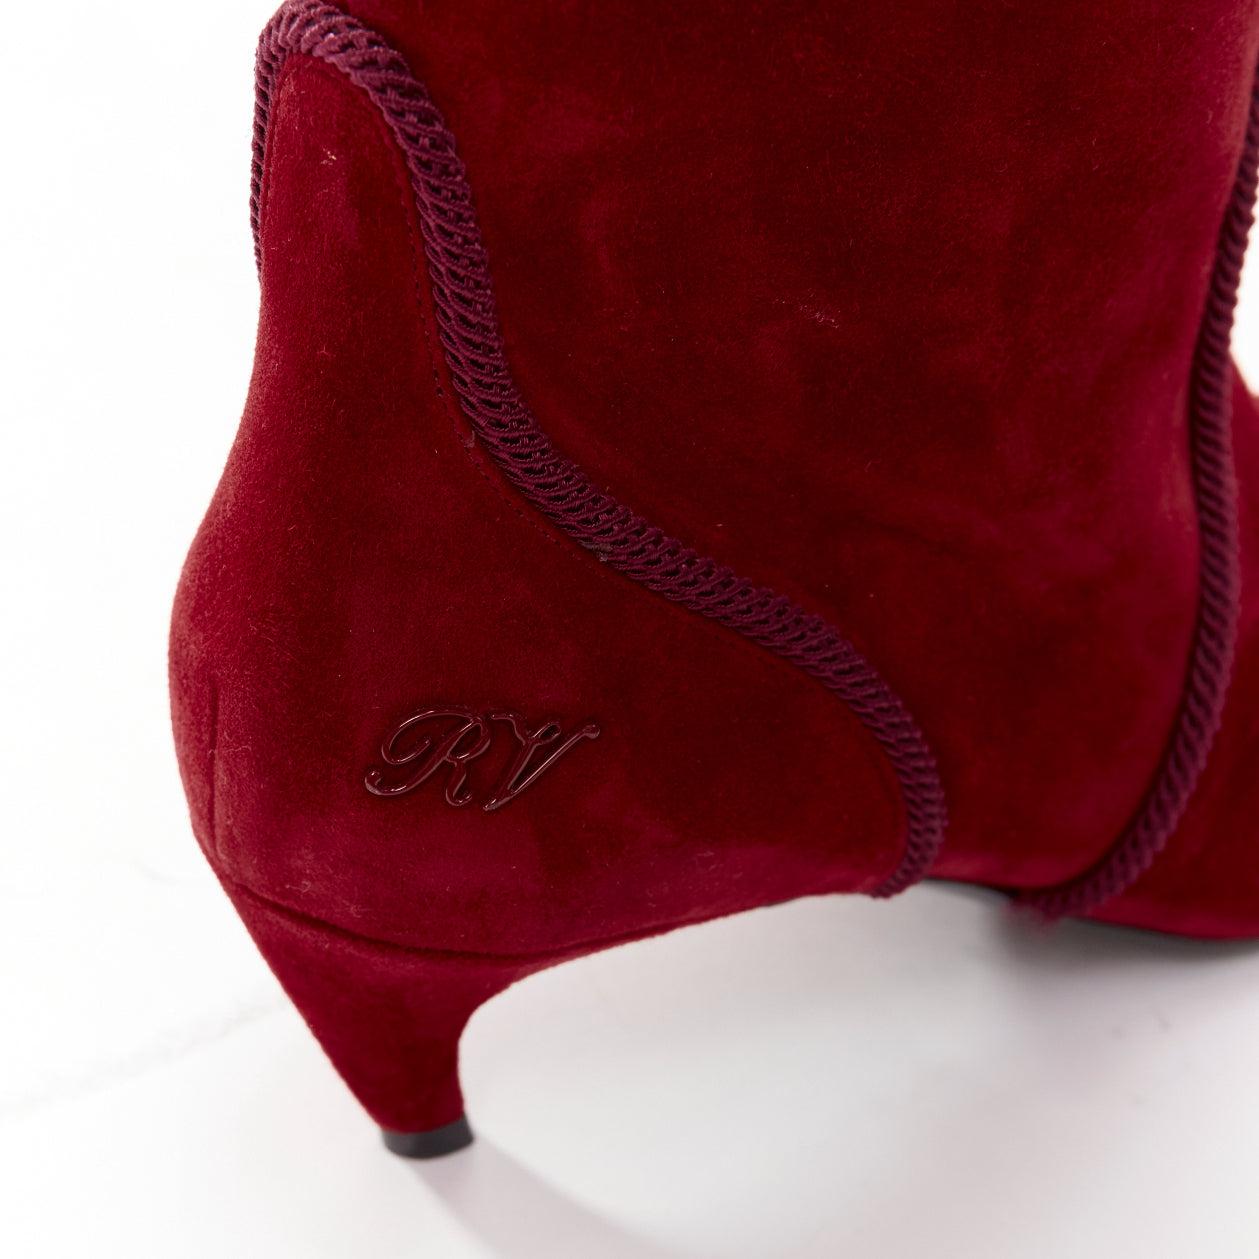 ROGER VIVIER red suede purple piping RV charm kitten heel cowboy boot EU37.5 For Sale 3